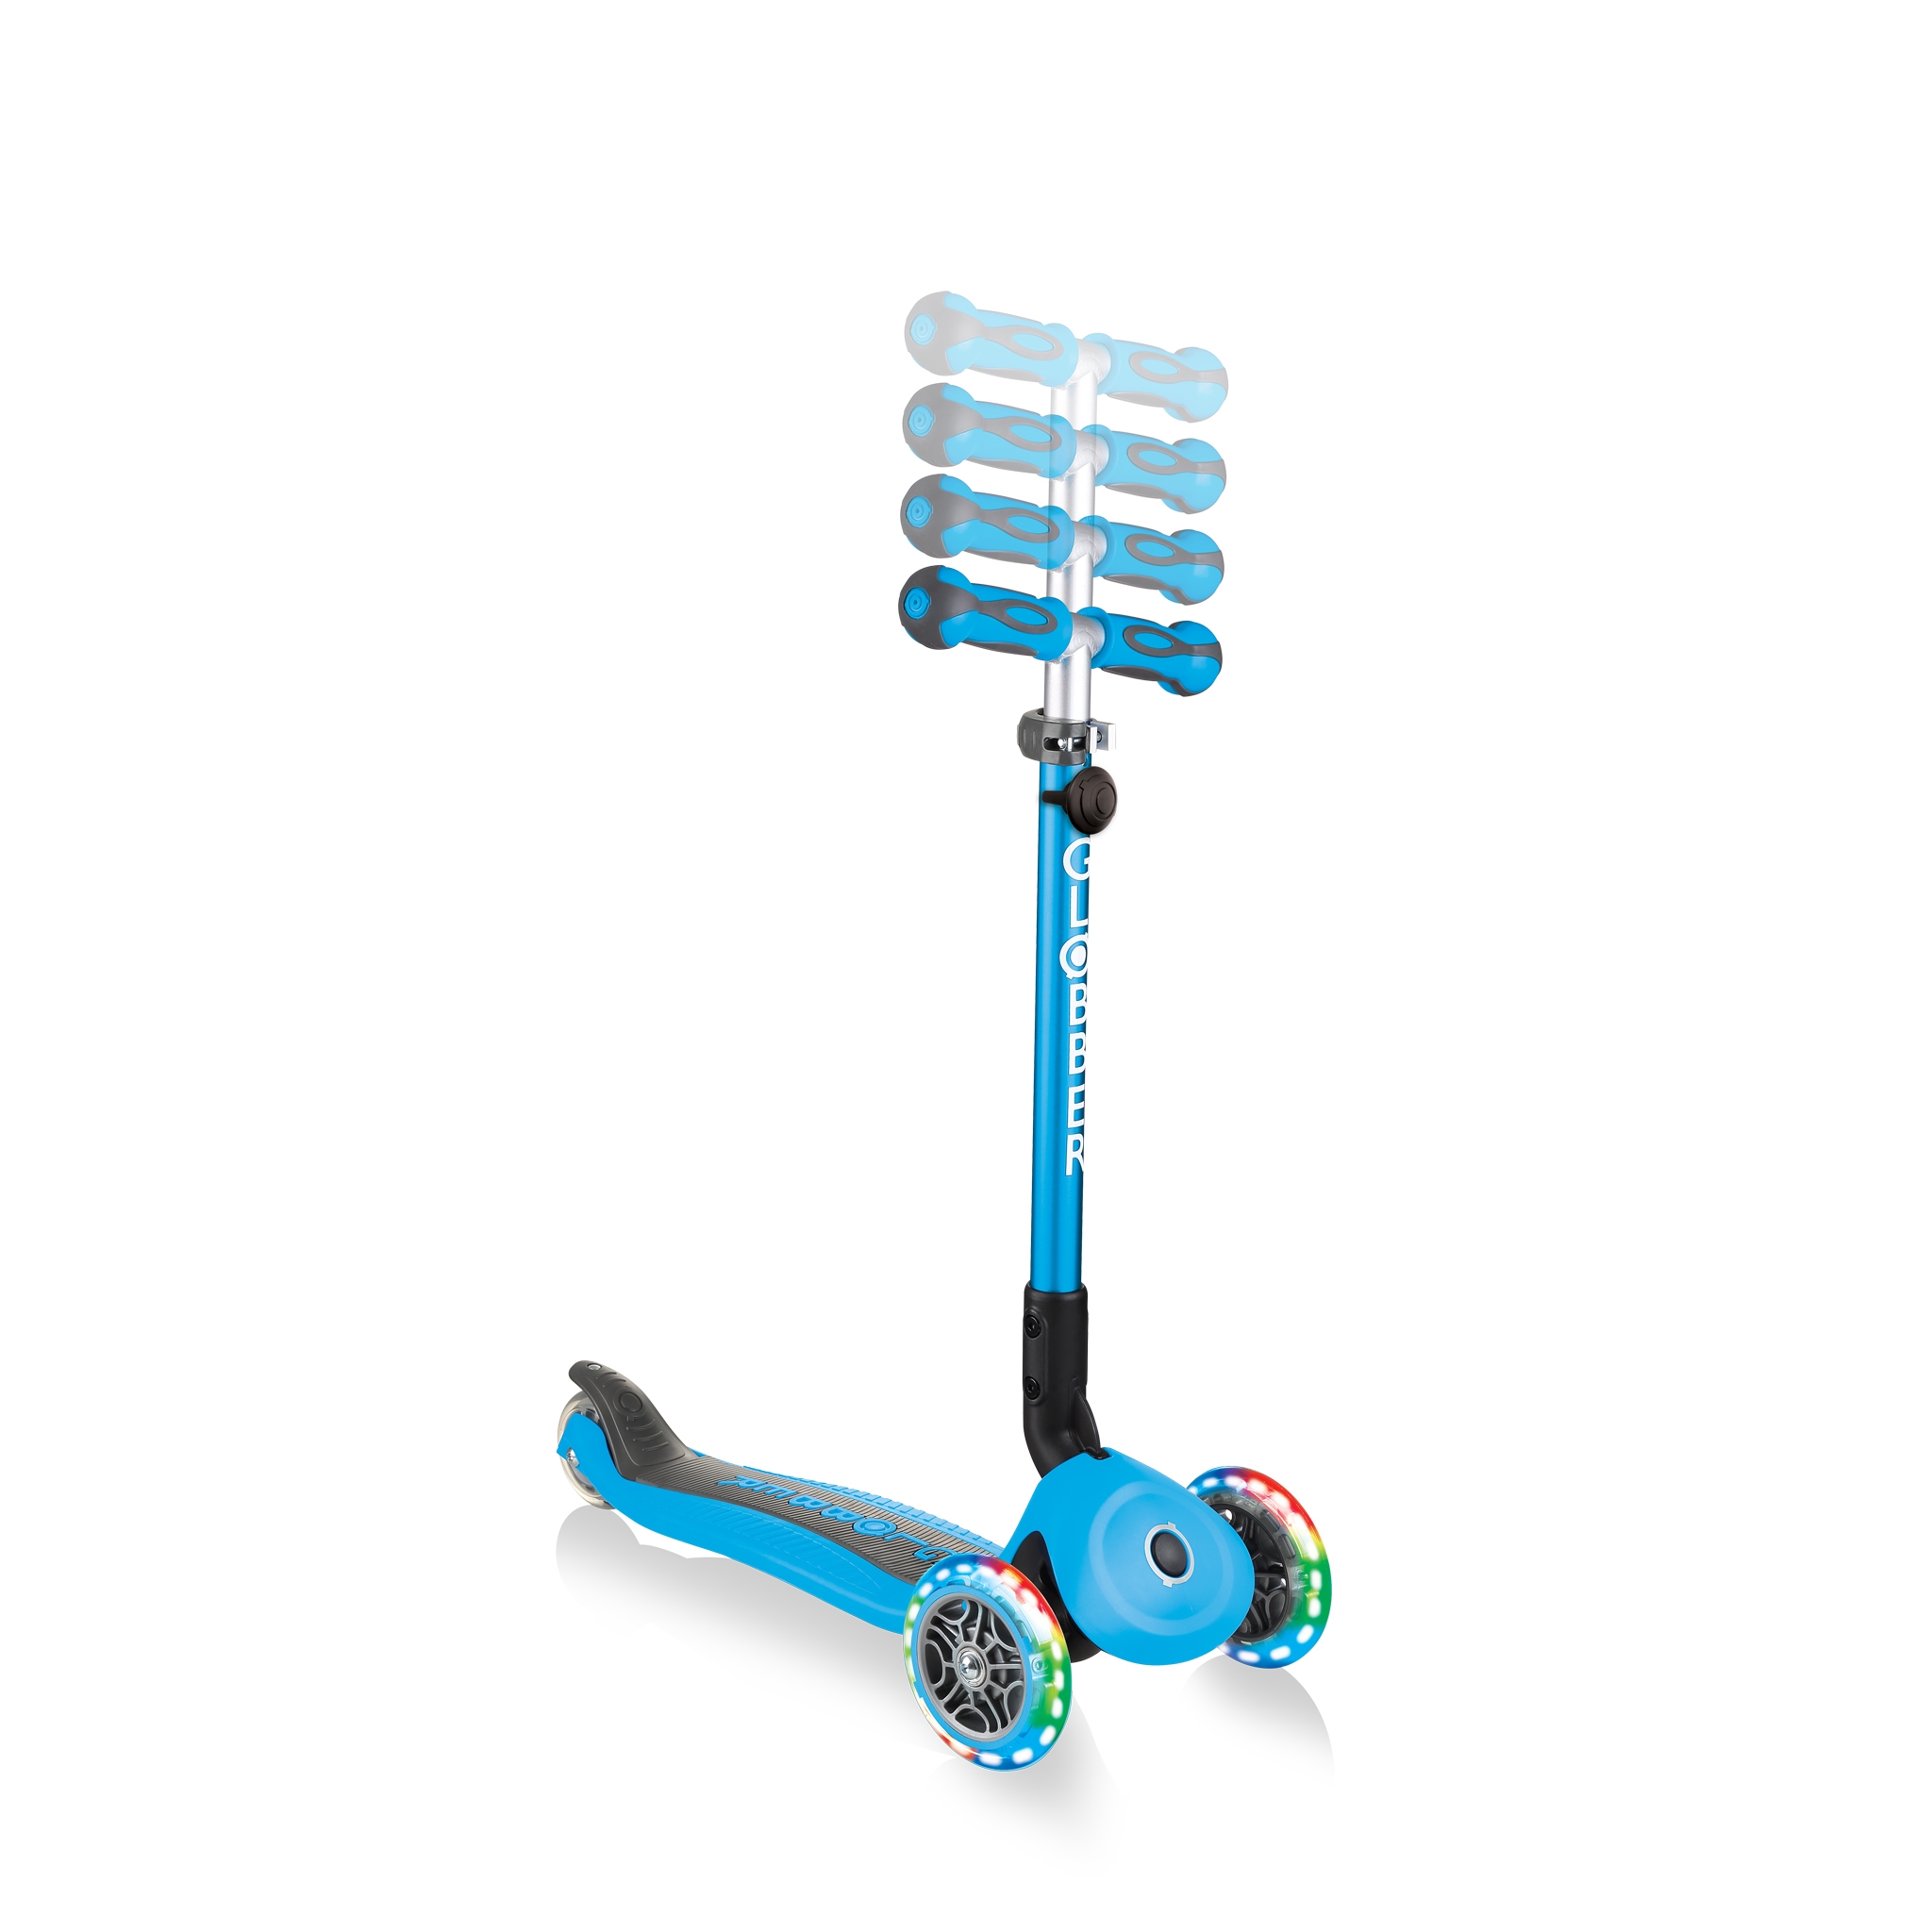 GO-UP-DELUXE-LIGHTS-ride-on-walking-bike-scooter-with-4-height-adjustable-T-bar-and-light-up-wheels-sky-blue 4